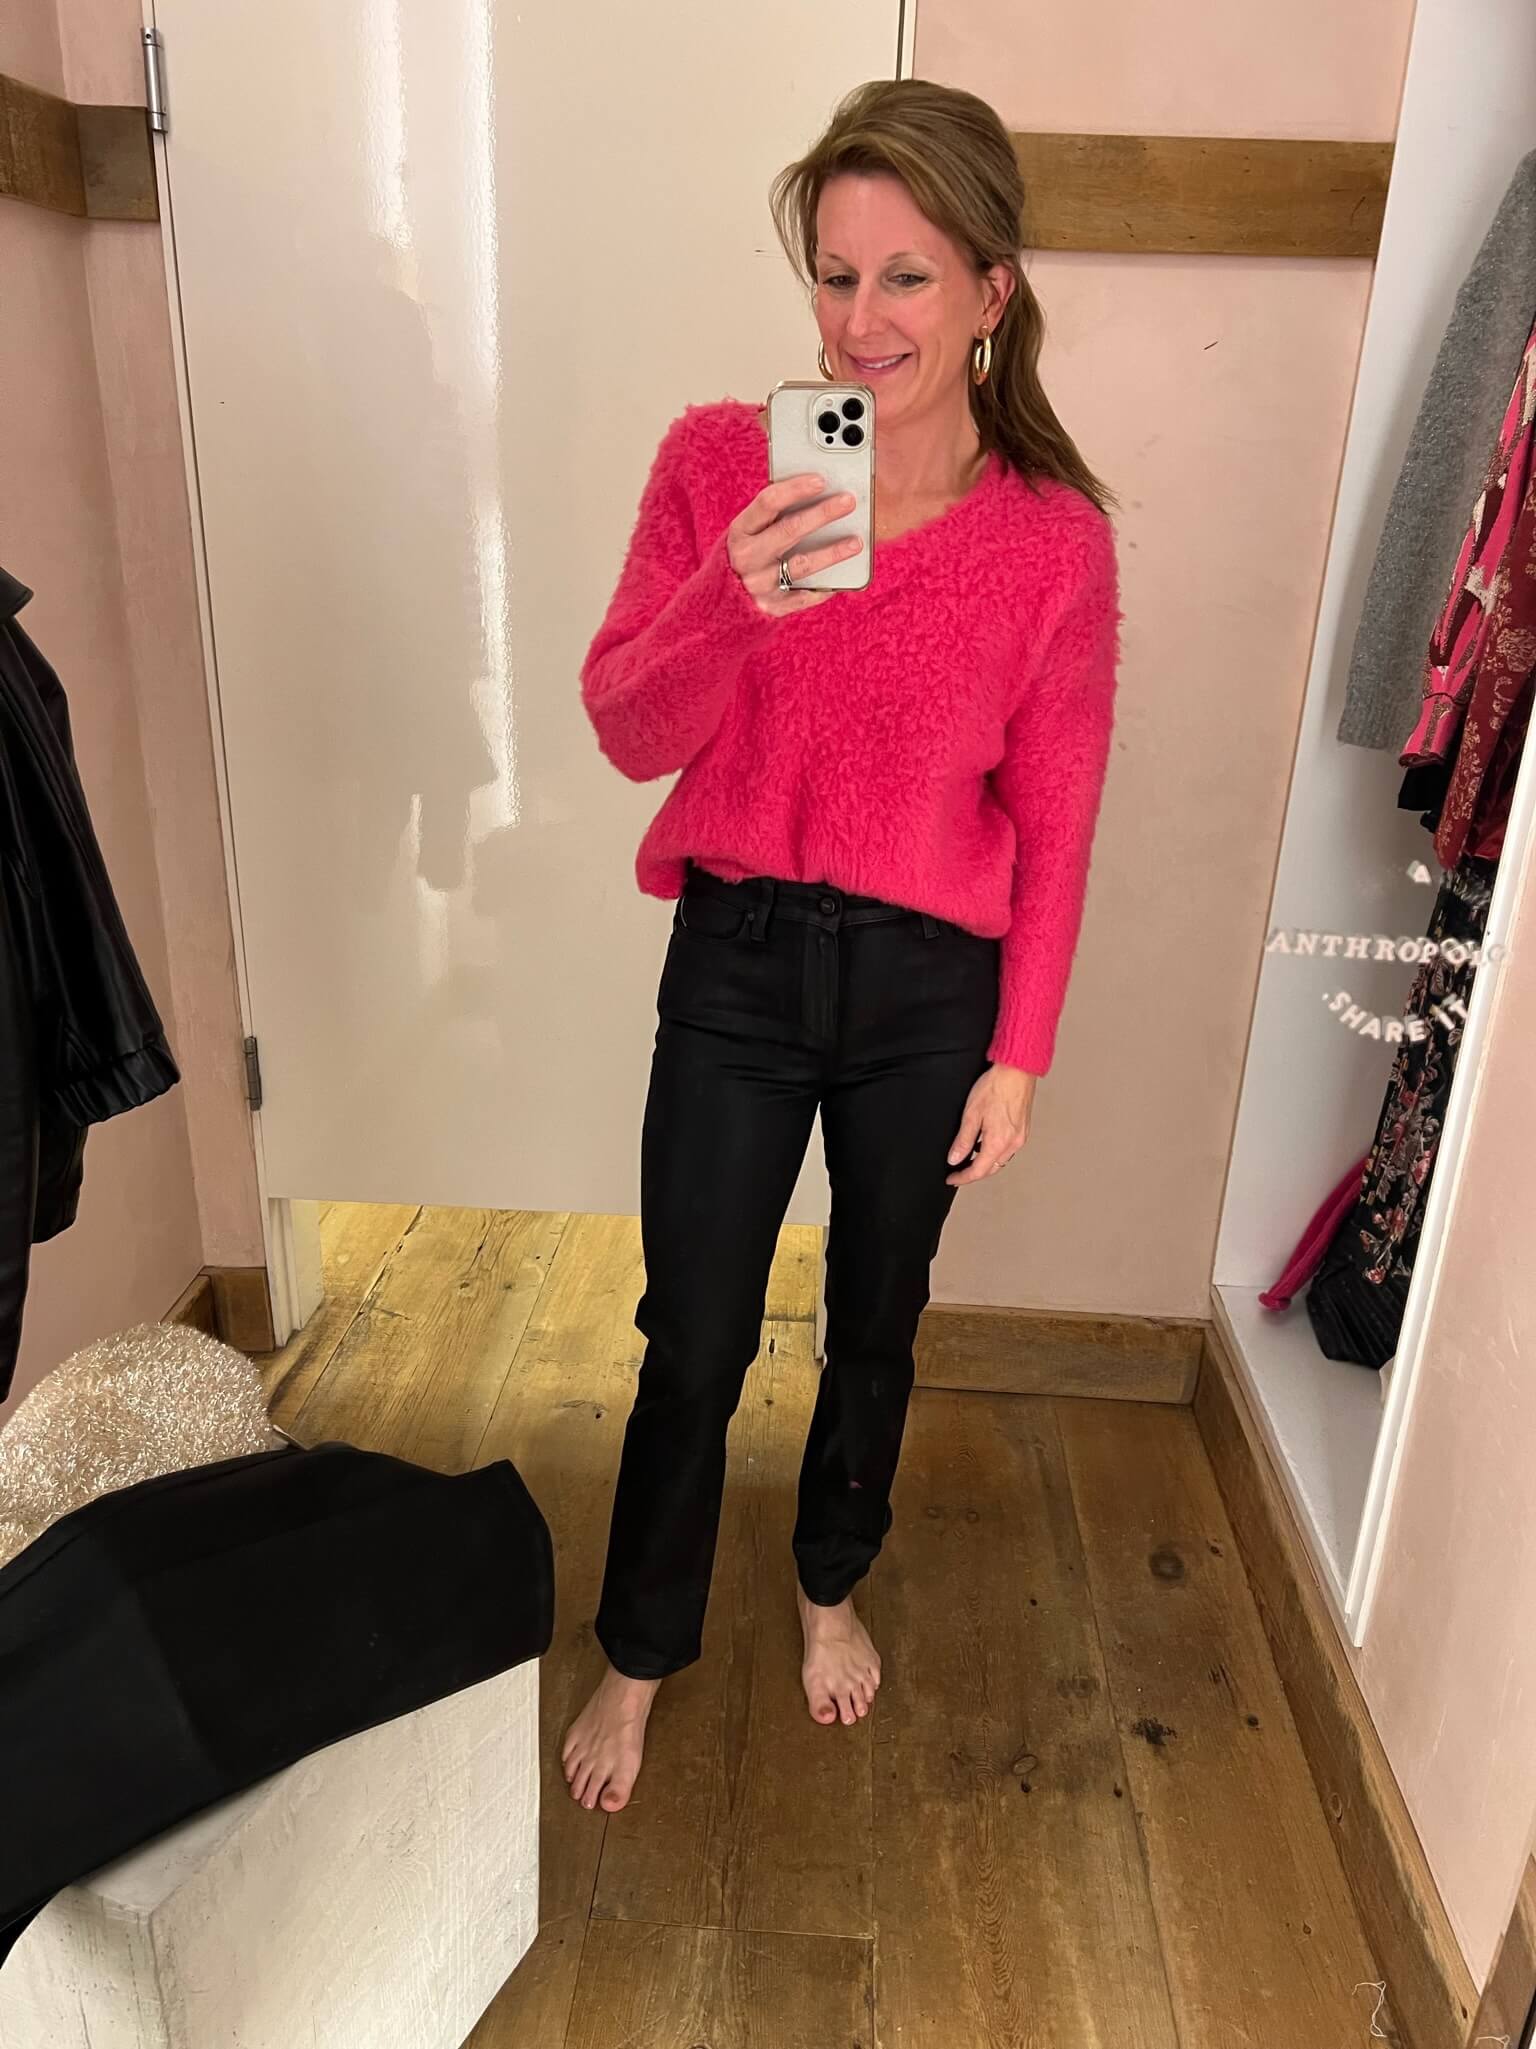 plush v-neck sweater how to wear hot pink this holiday season how to style pink for a Christmas party how to wear pink to a holiday party